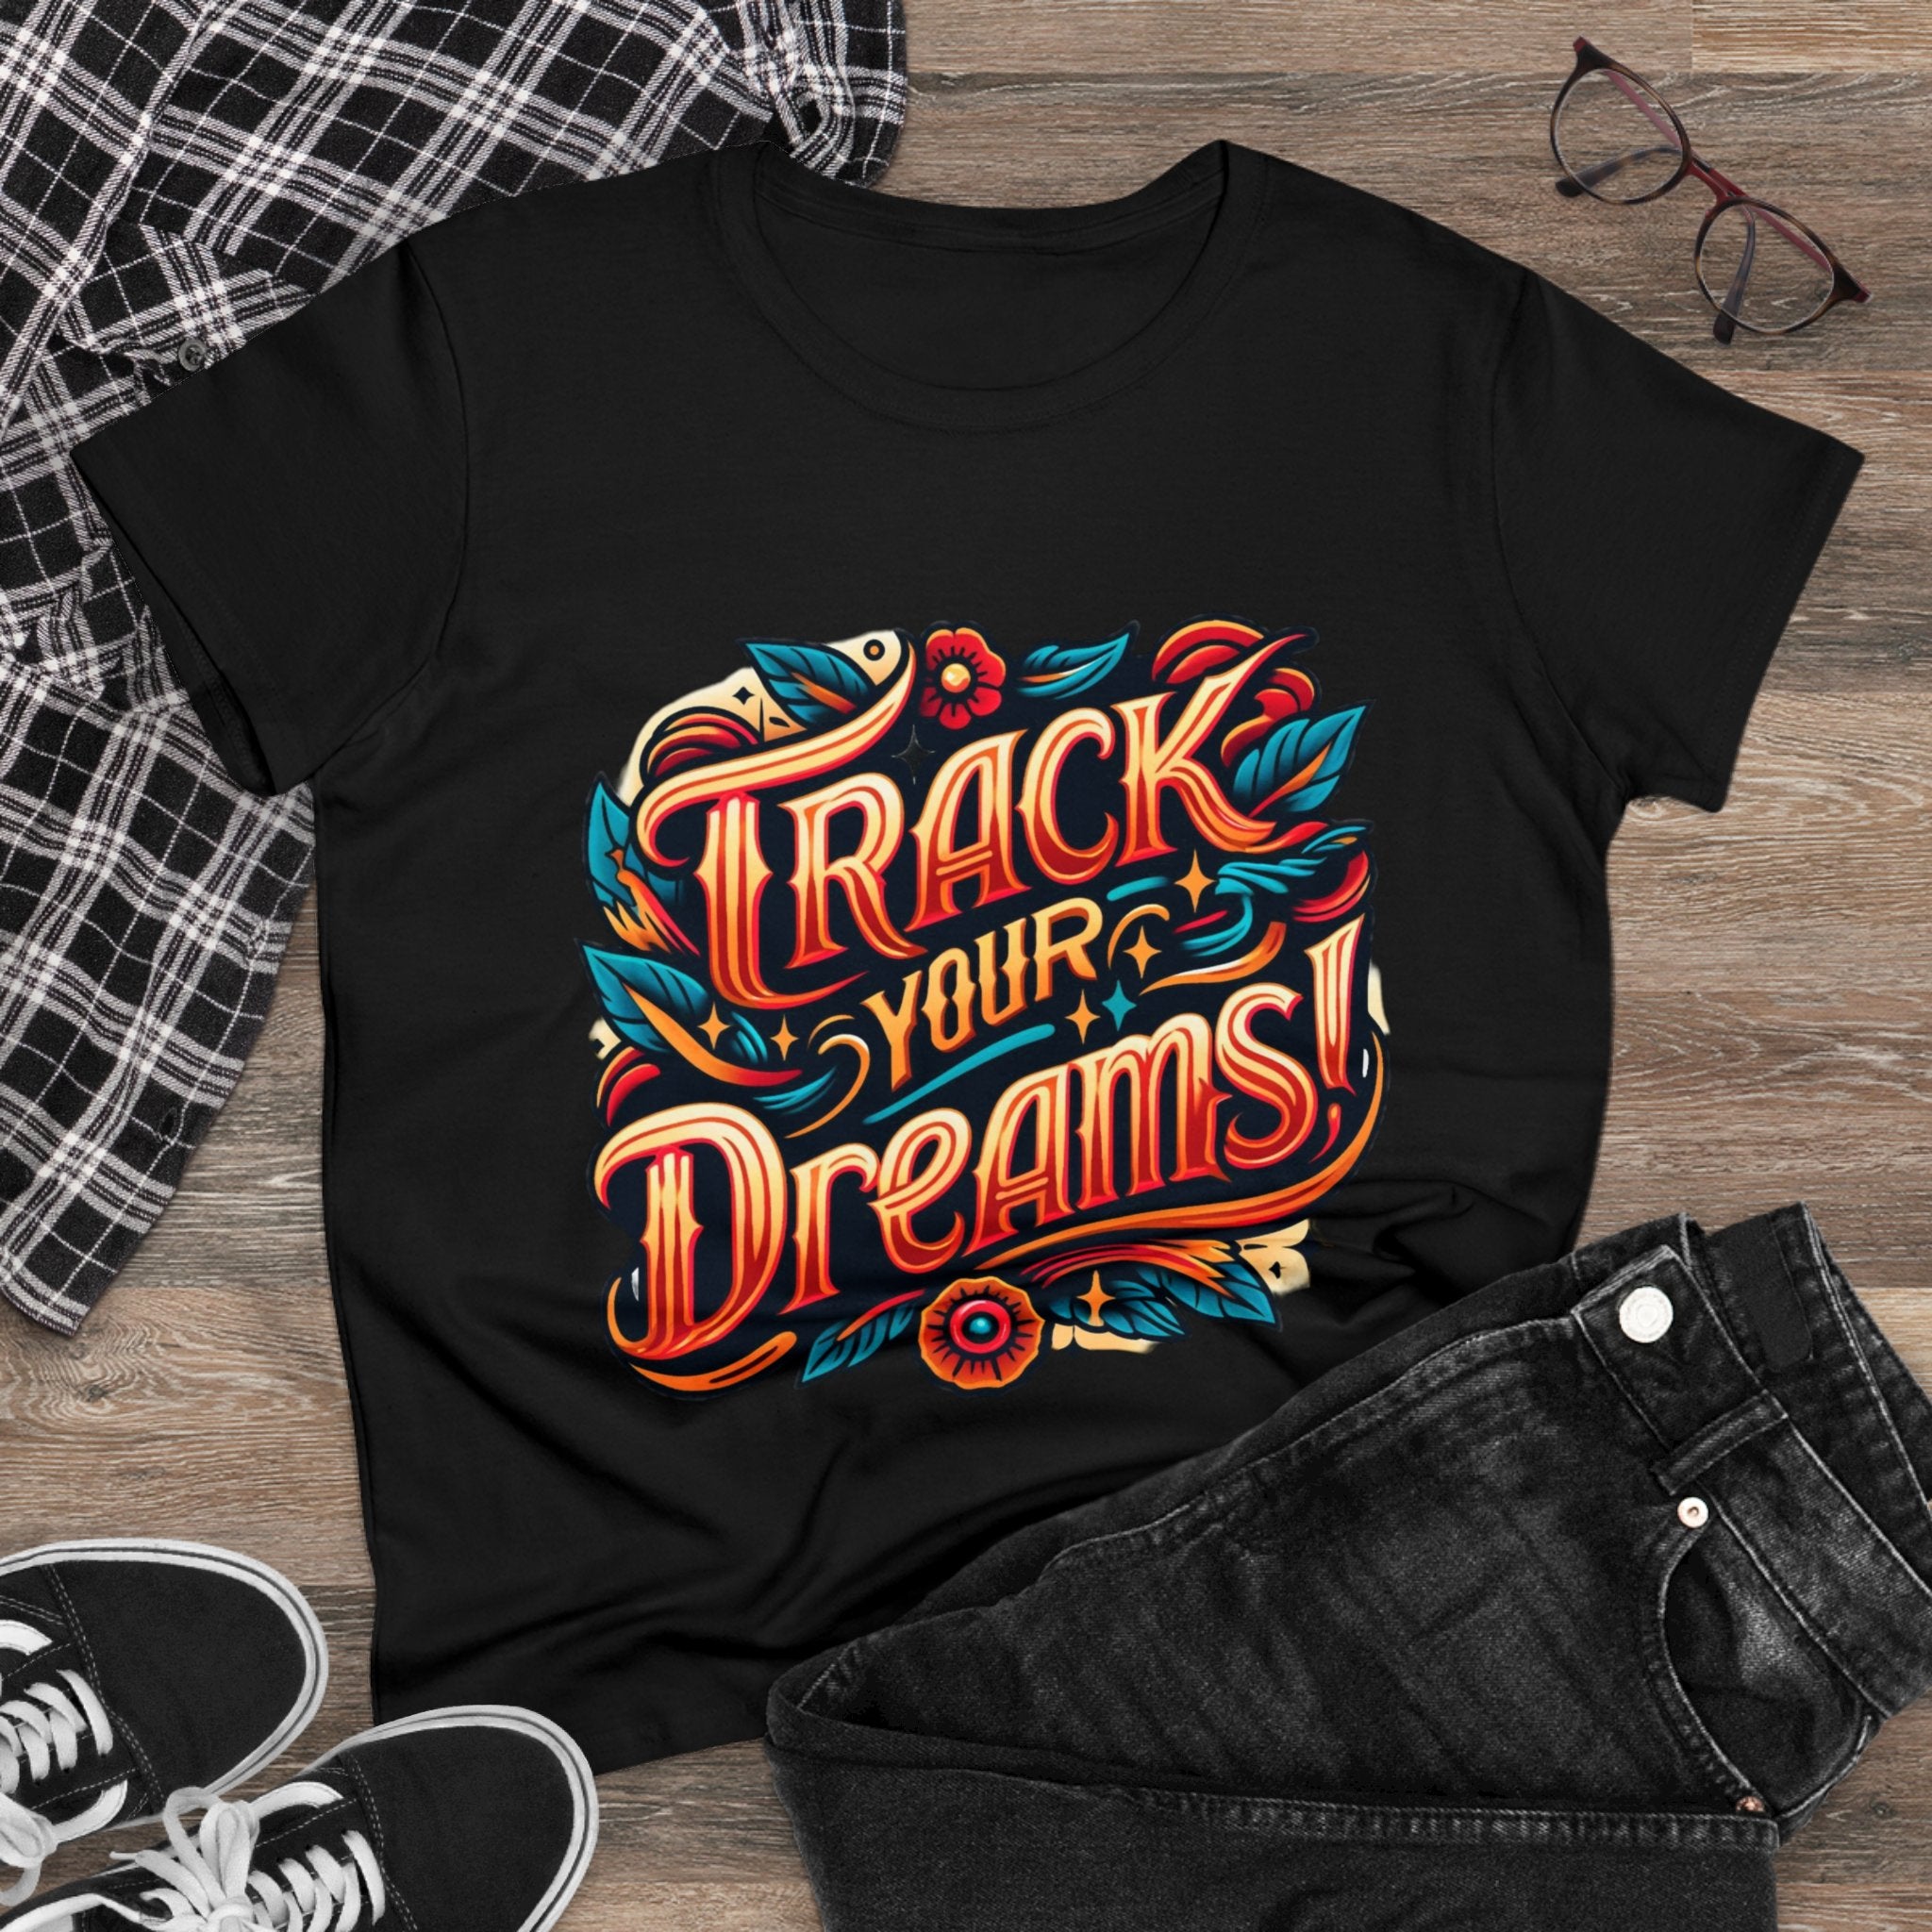 Women's T-Shirt | Track Your Dreams